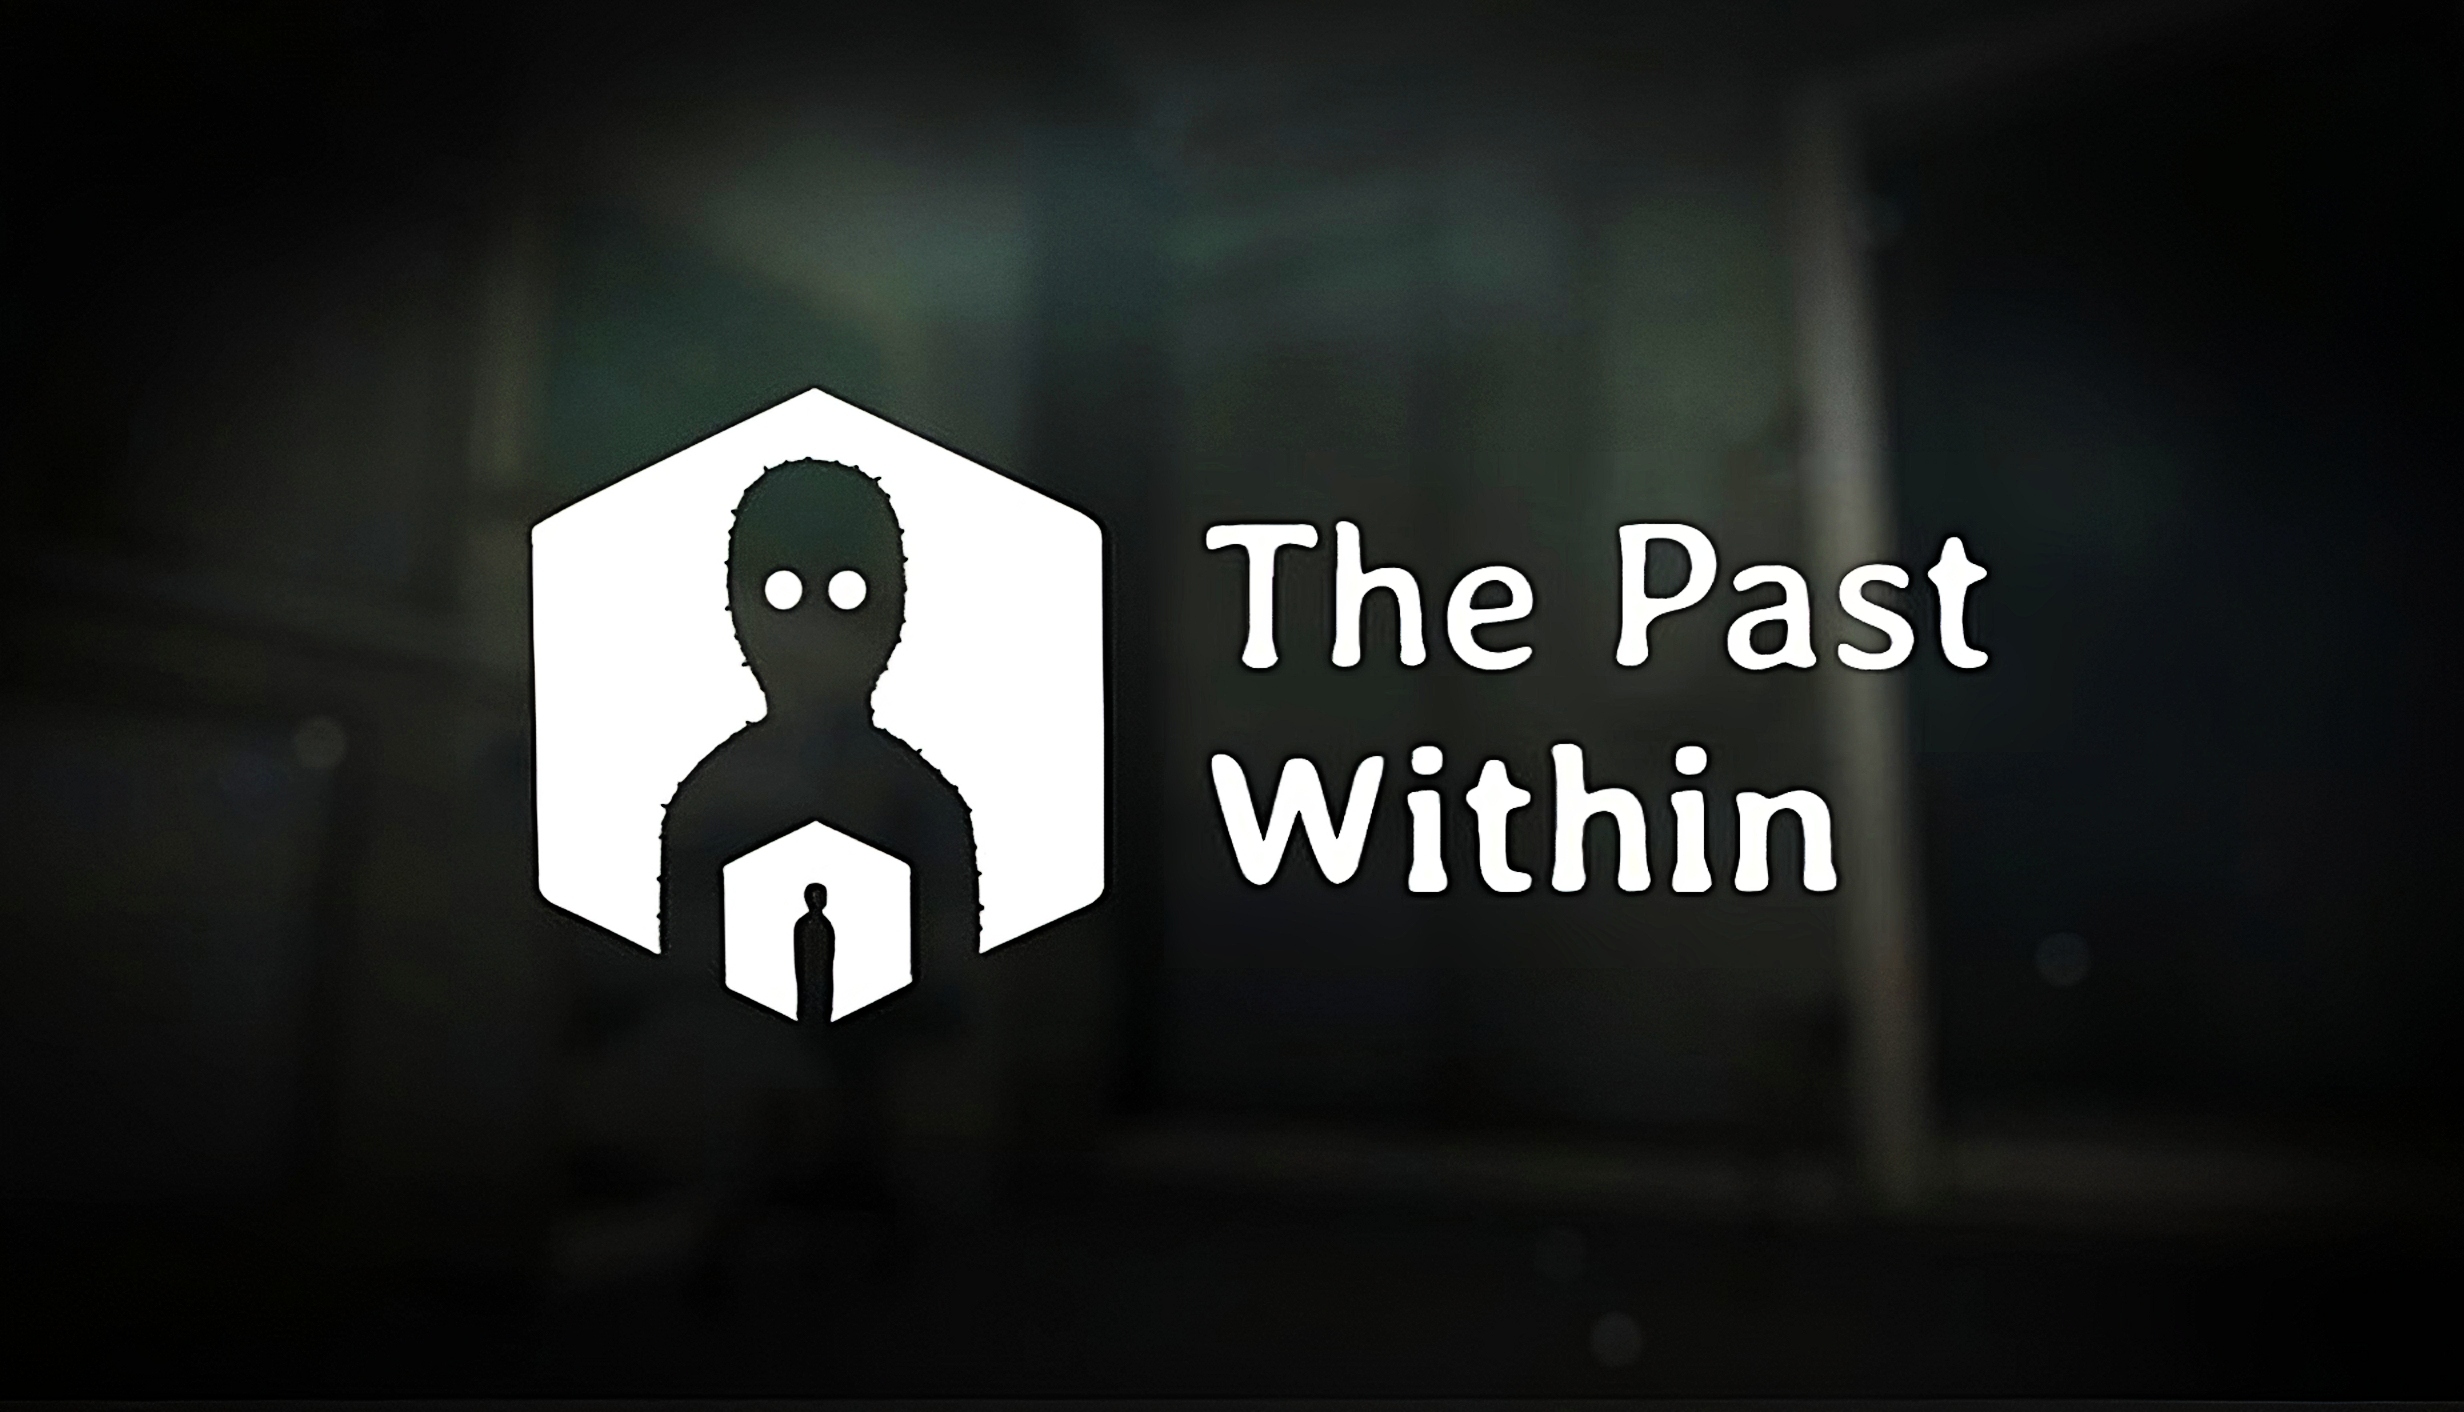 The past within rusty. The past within. Игра the past within. Игра Rusty Lake the past within. Игра "the past within" Постер.